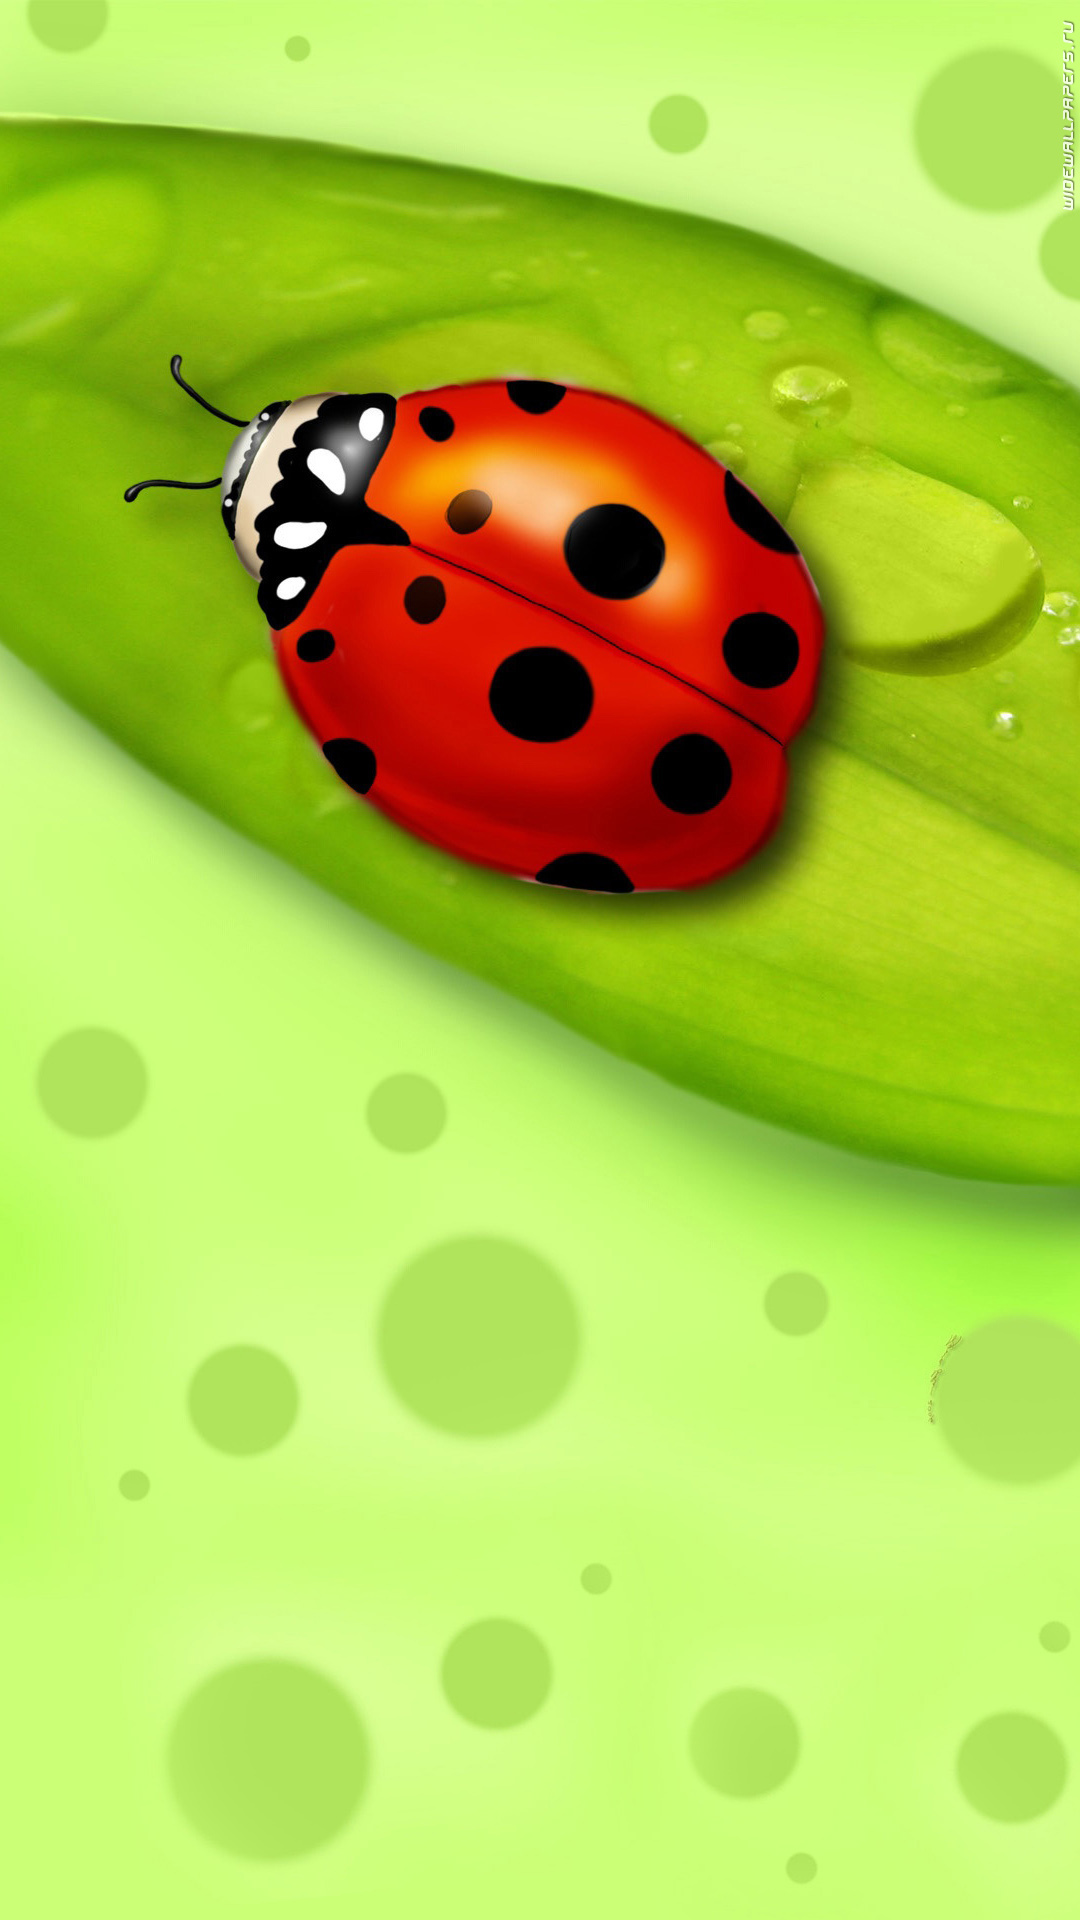 13374 download wallpaper pictures, insects, ladybugs, green screensavers and pictures for free